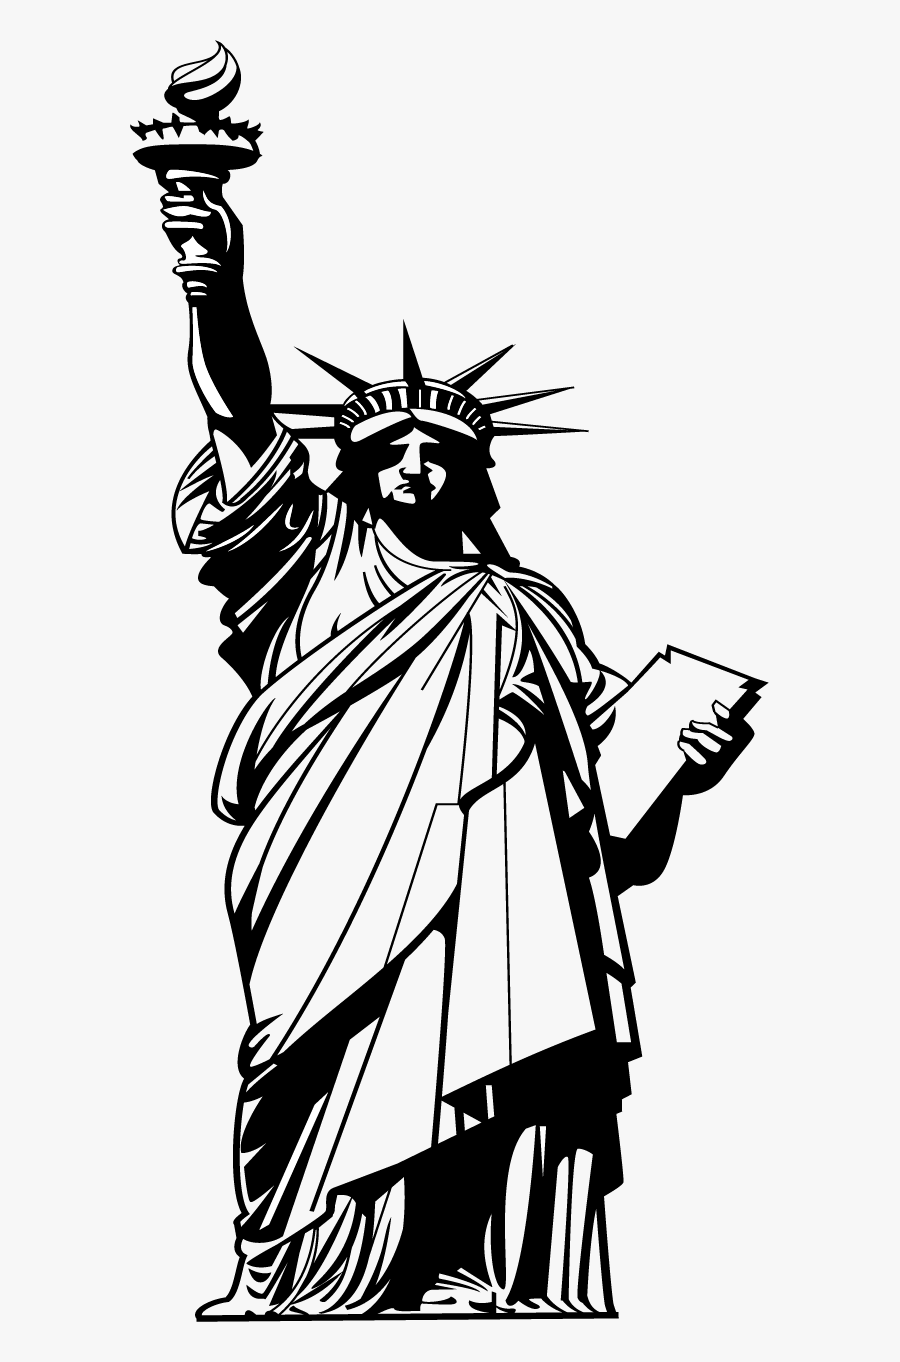 Statue Of Liberty Ellis - Statue Of Liberty Line Drawings, Transparent Clipart